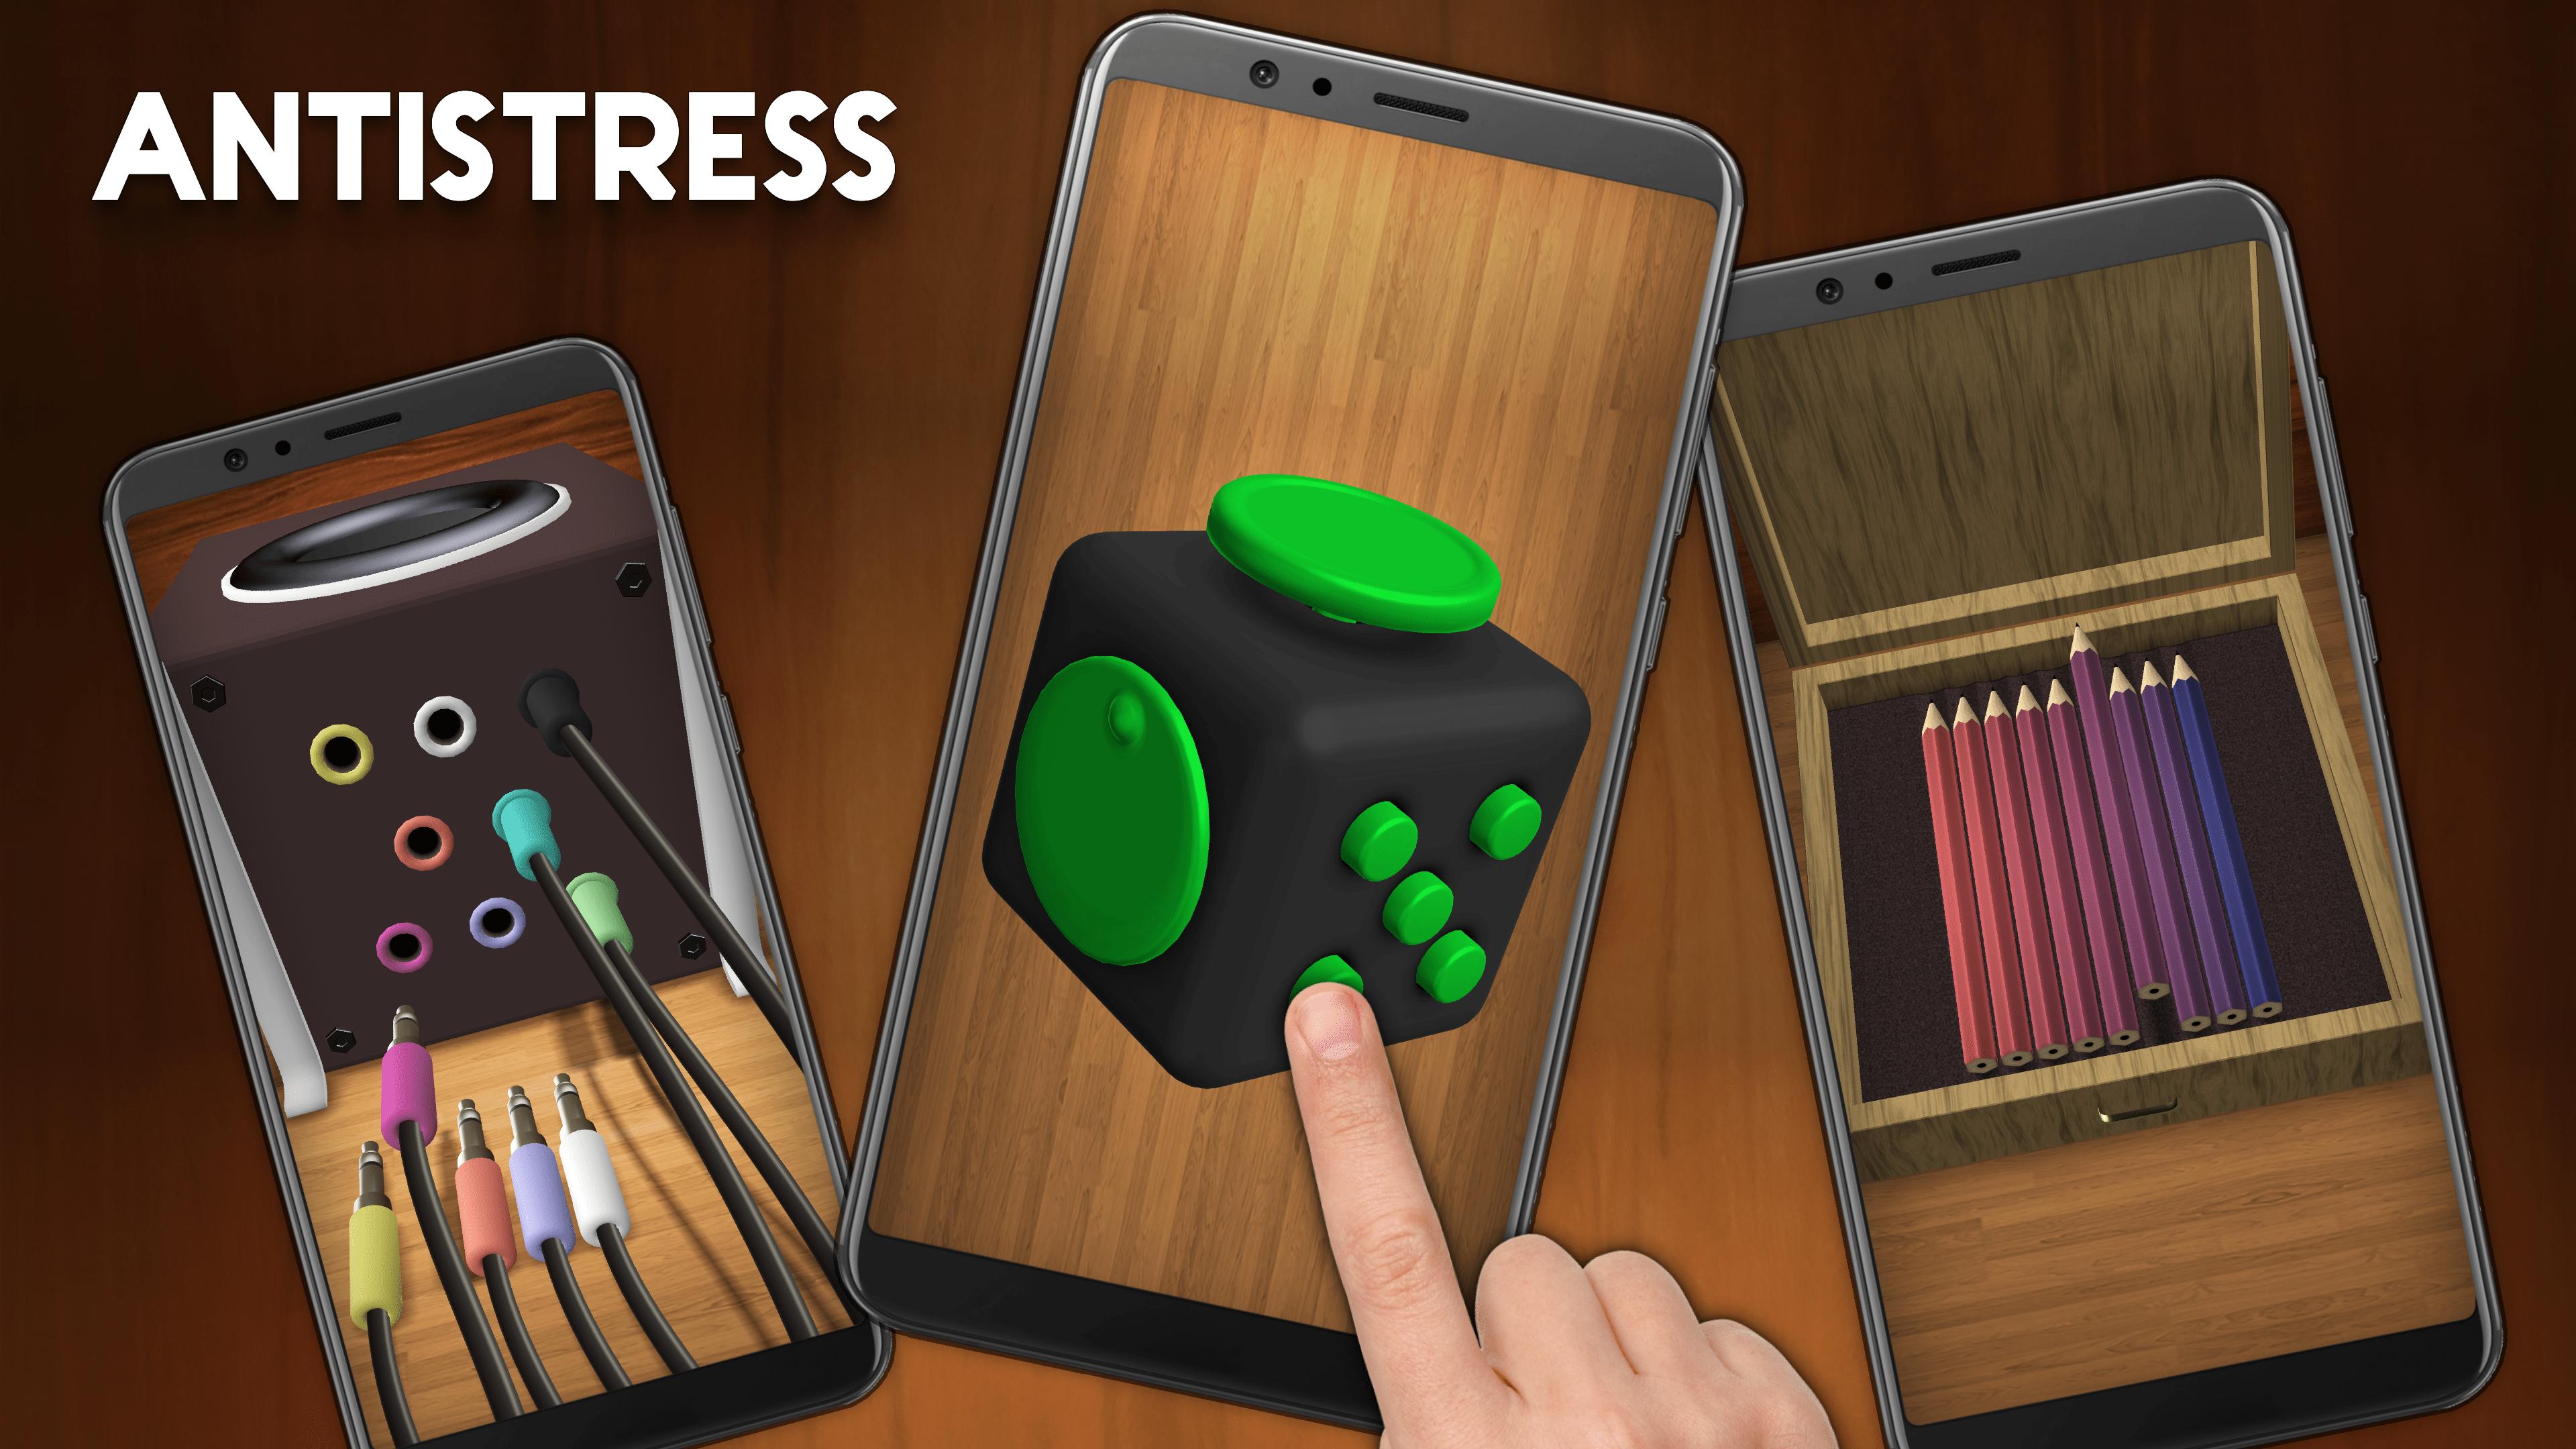 Antistress for Android - APK Download